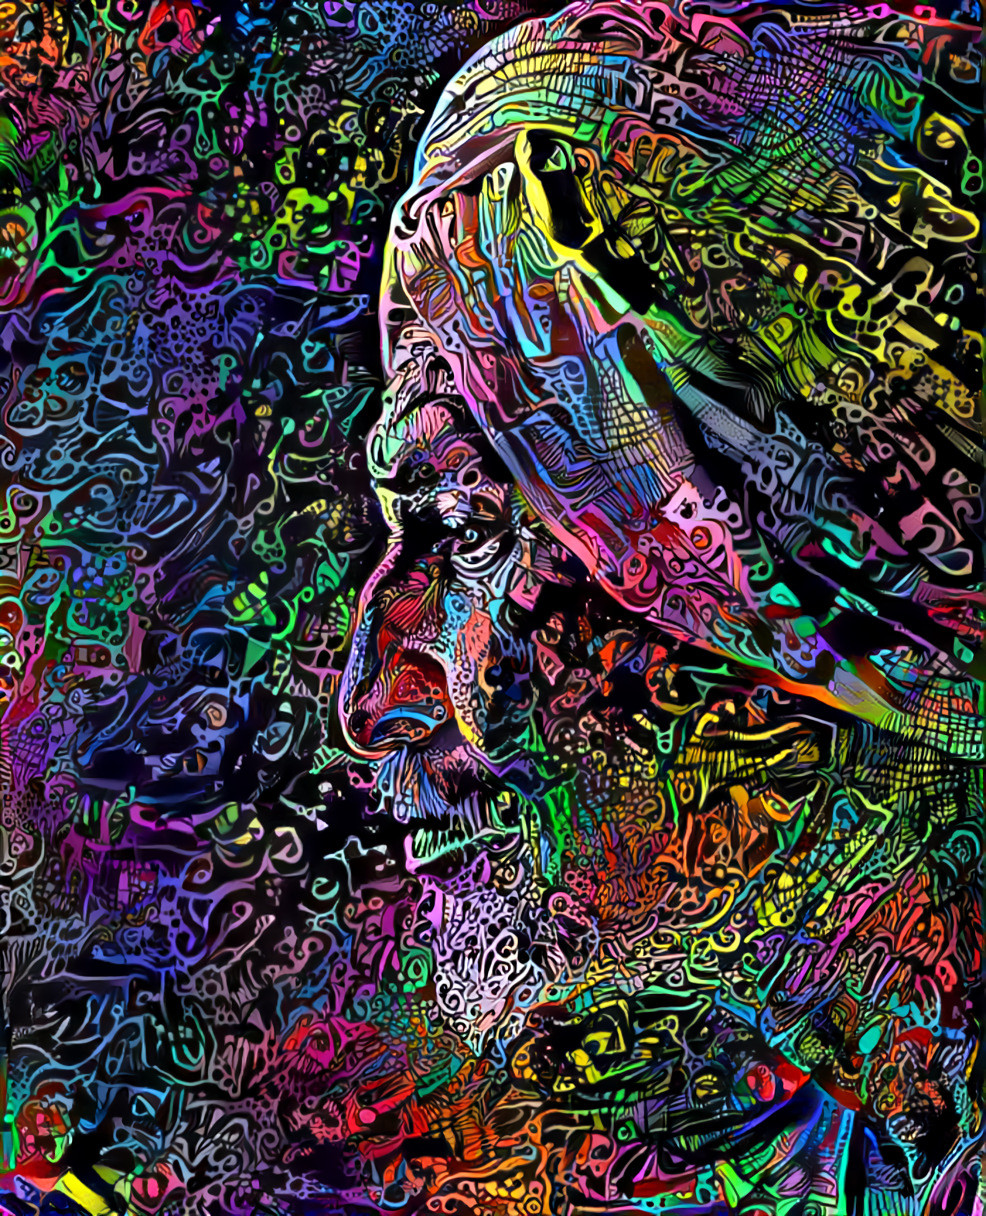 Man of Psychedelia